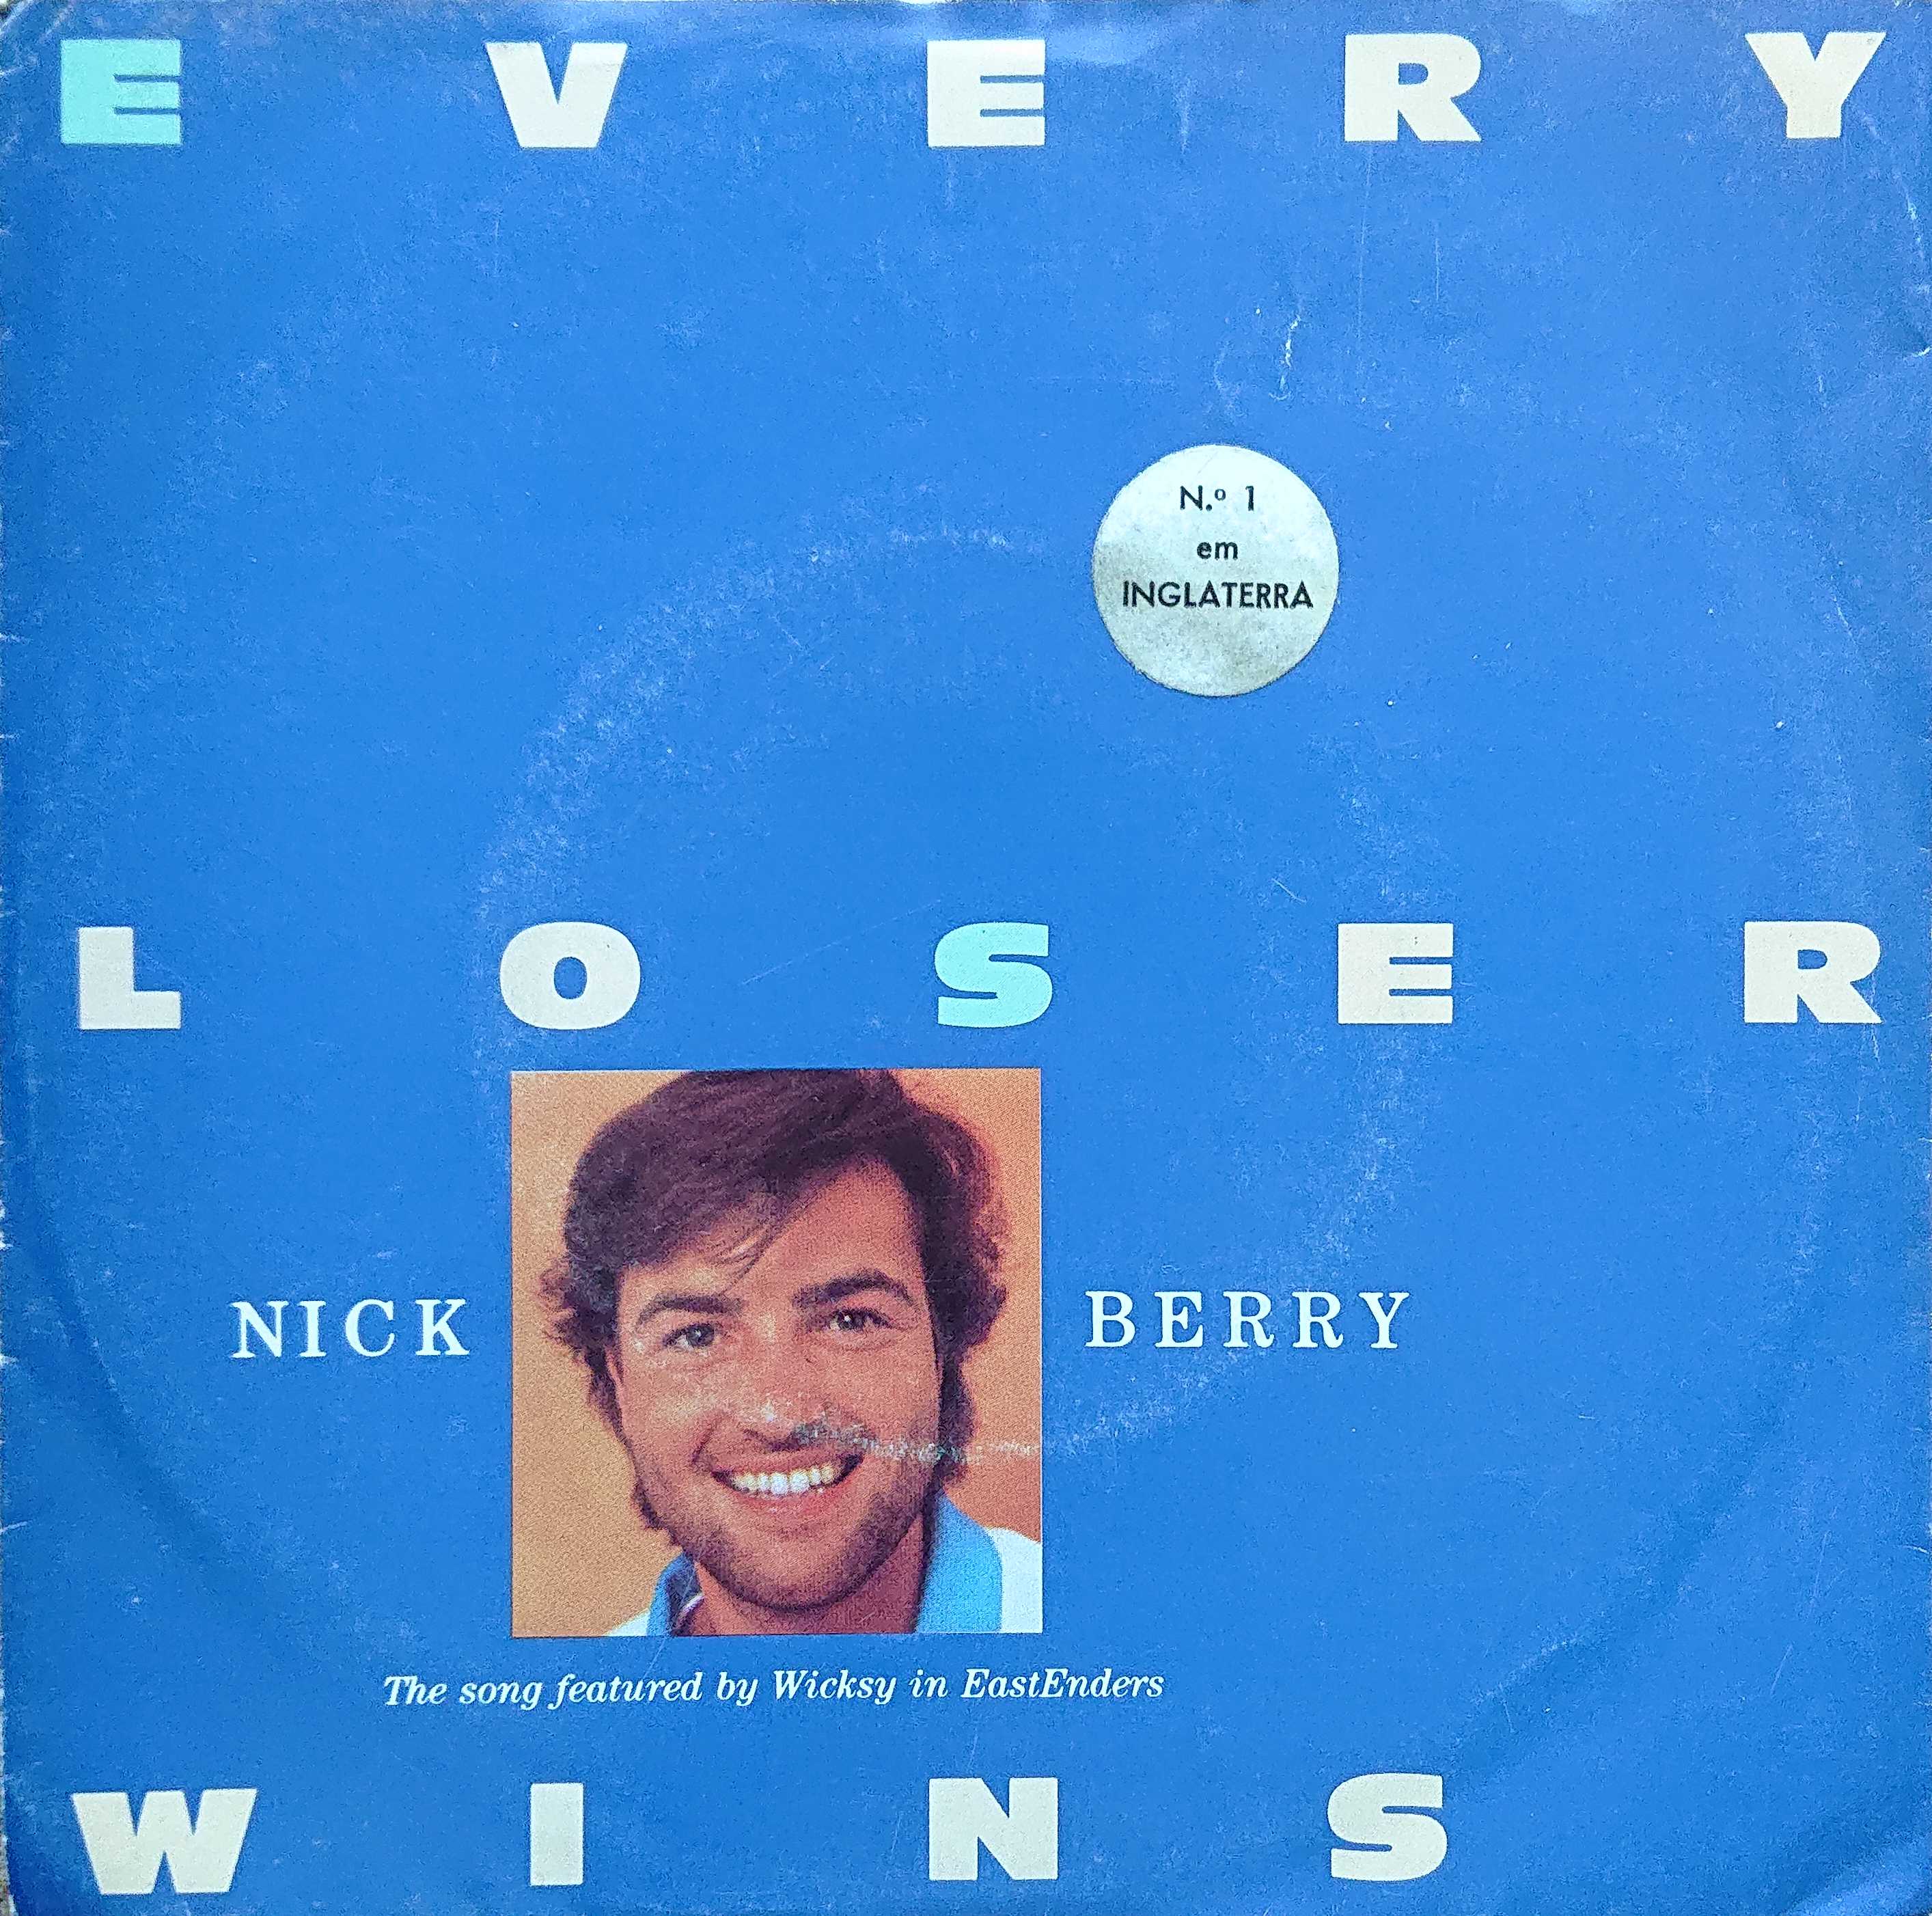 Picture of RESL 204-iPO Every loser wins by artist Simon May / Stewart and Bradley James from the BBC singles - Records and Tapes library